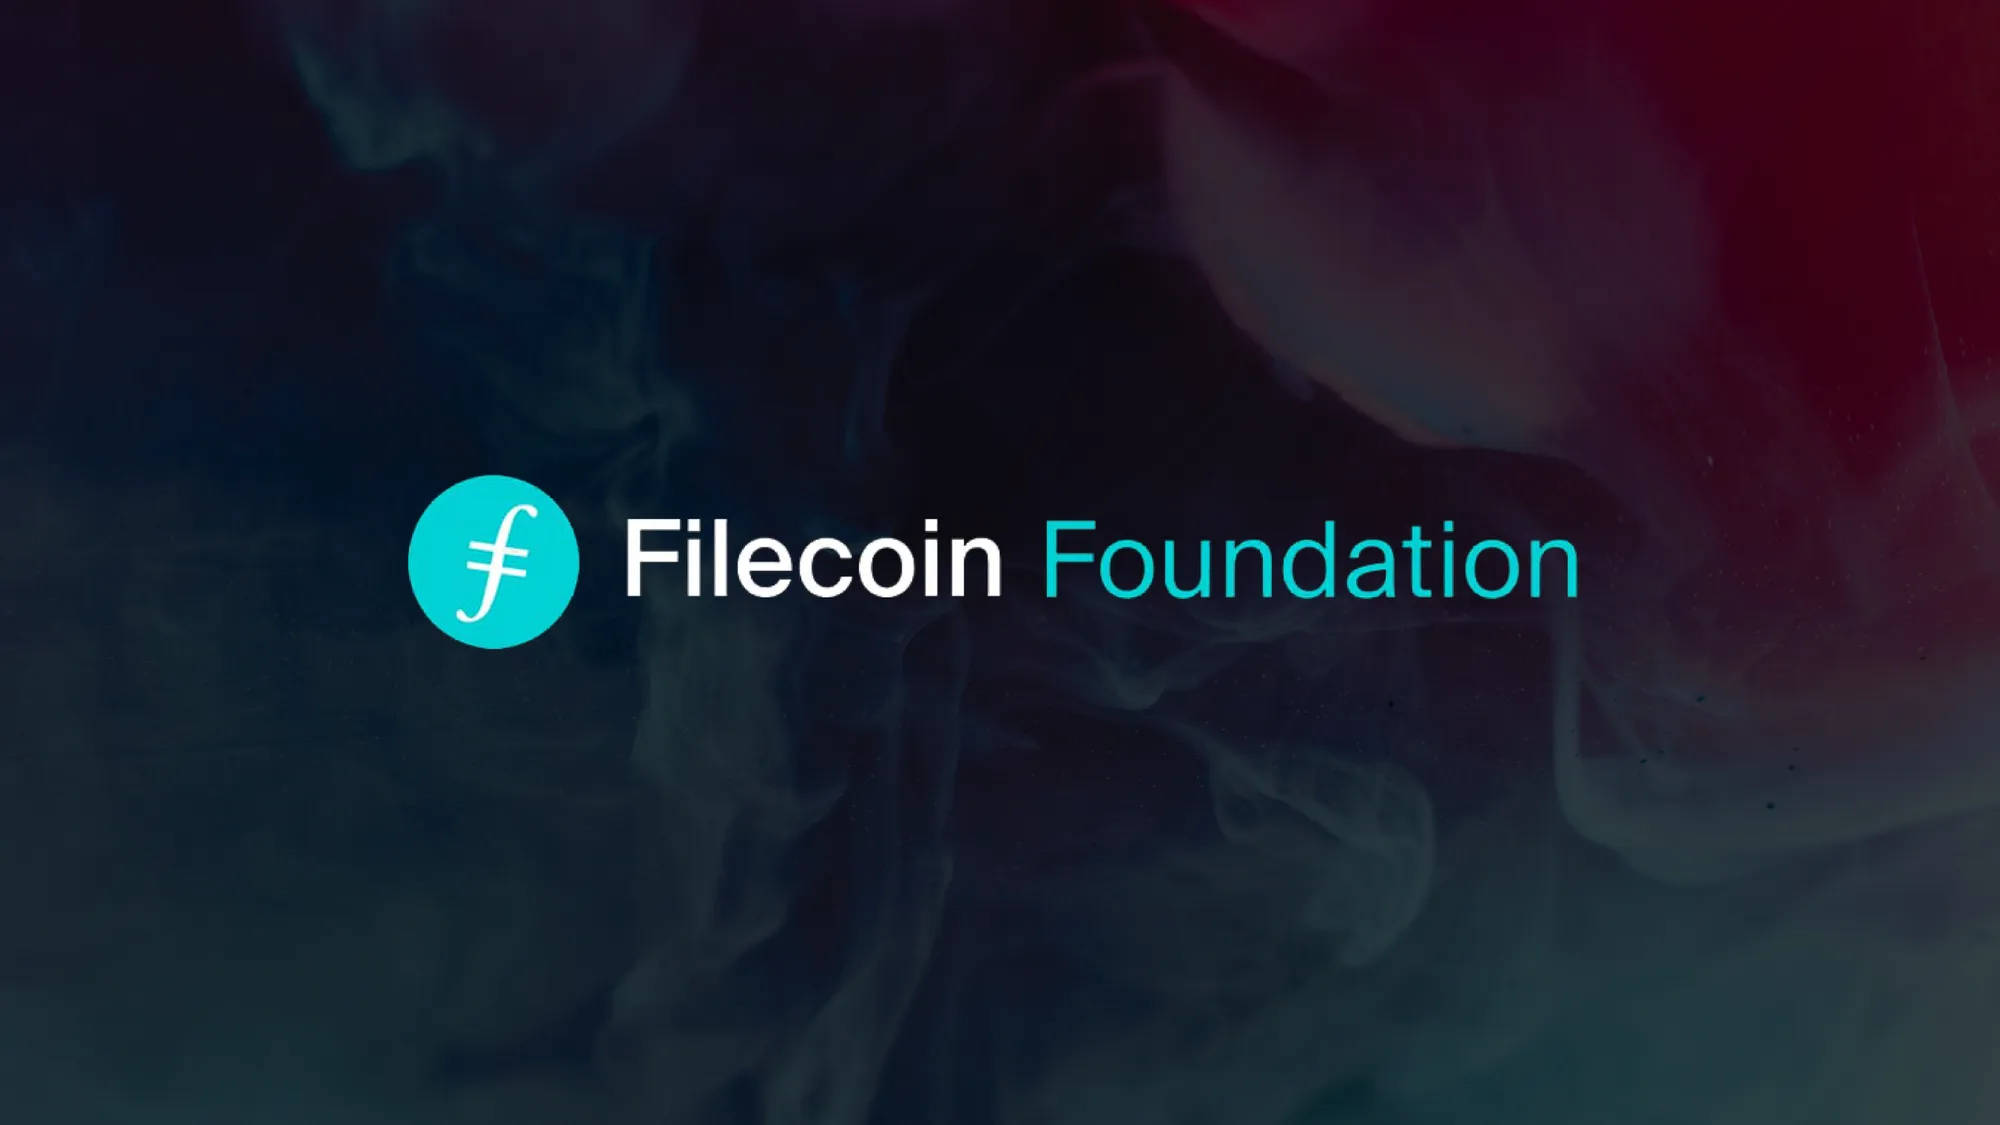 Danny O'Brien on the Filecoin Foundation and Redecentralizing the Web